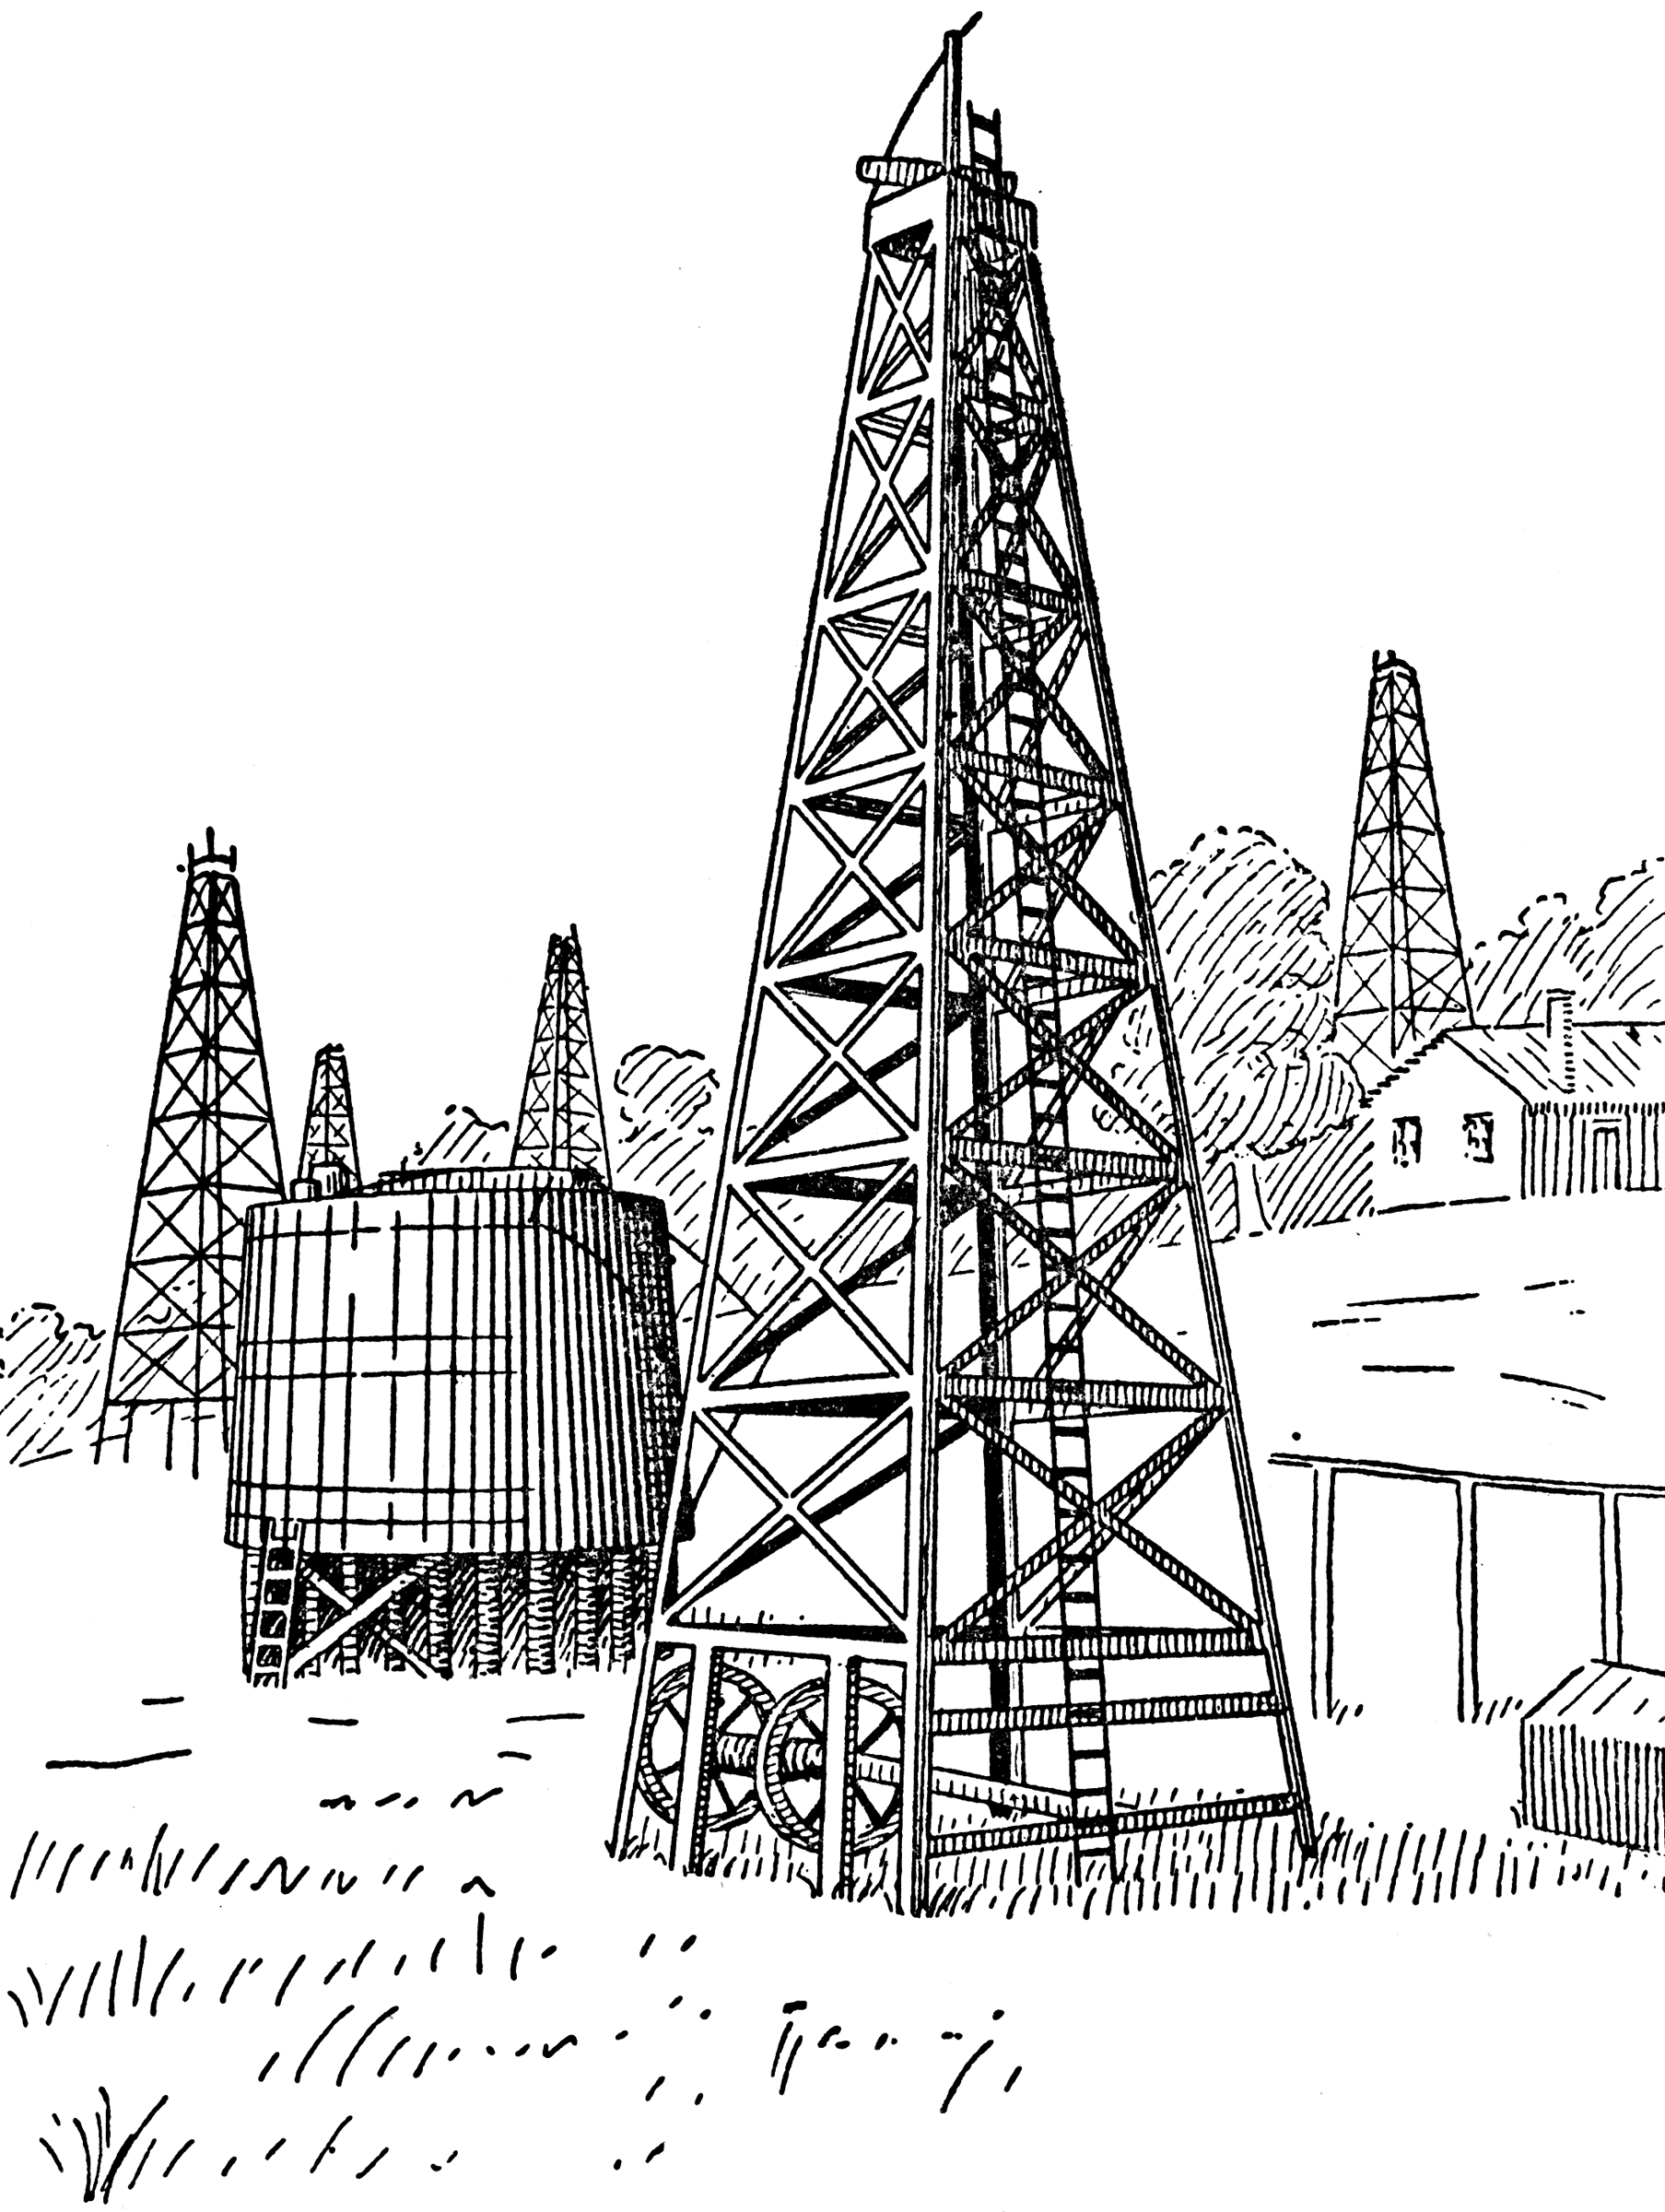 clipart oil well - photo #24